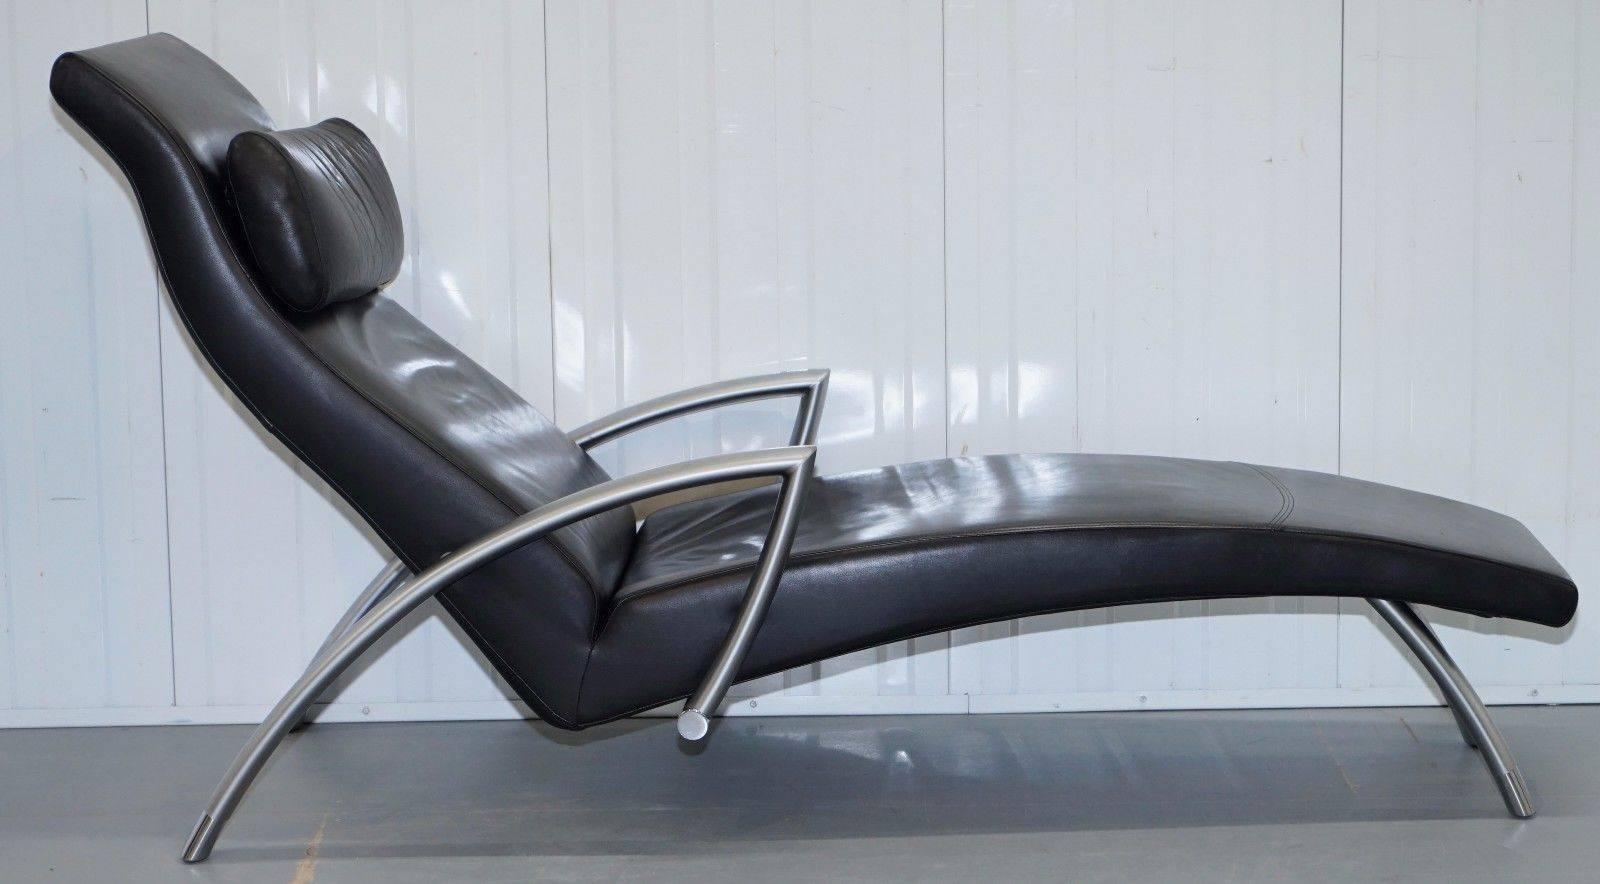 Italian Stunning Rolf Benz Creation 2600 Black Leather Contemporary Lounge Chair Recline